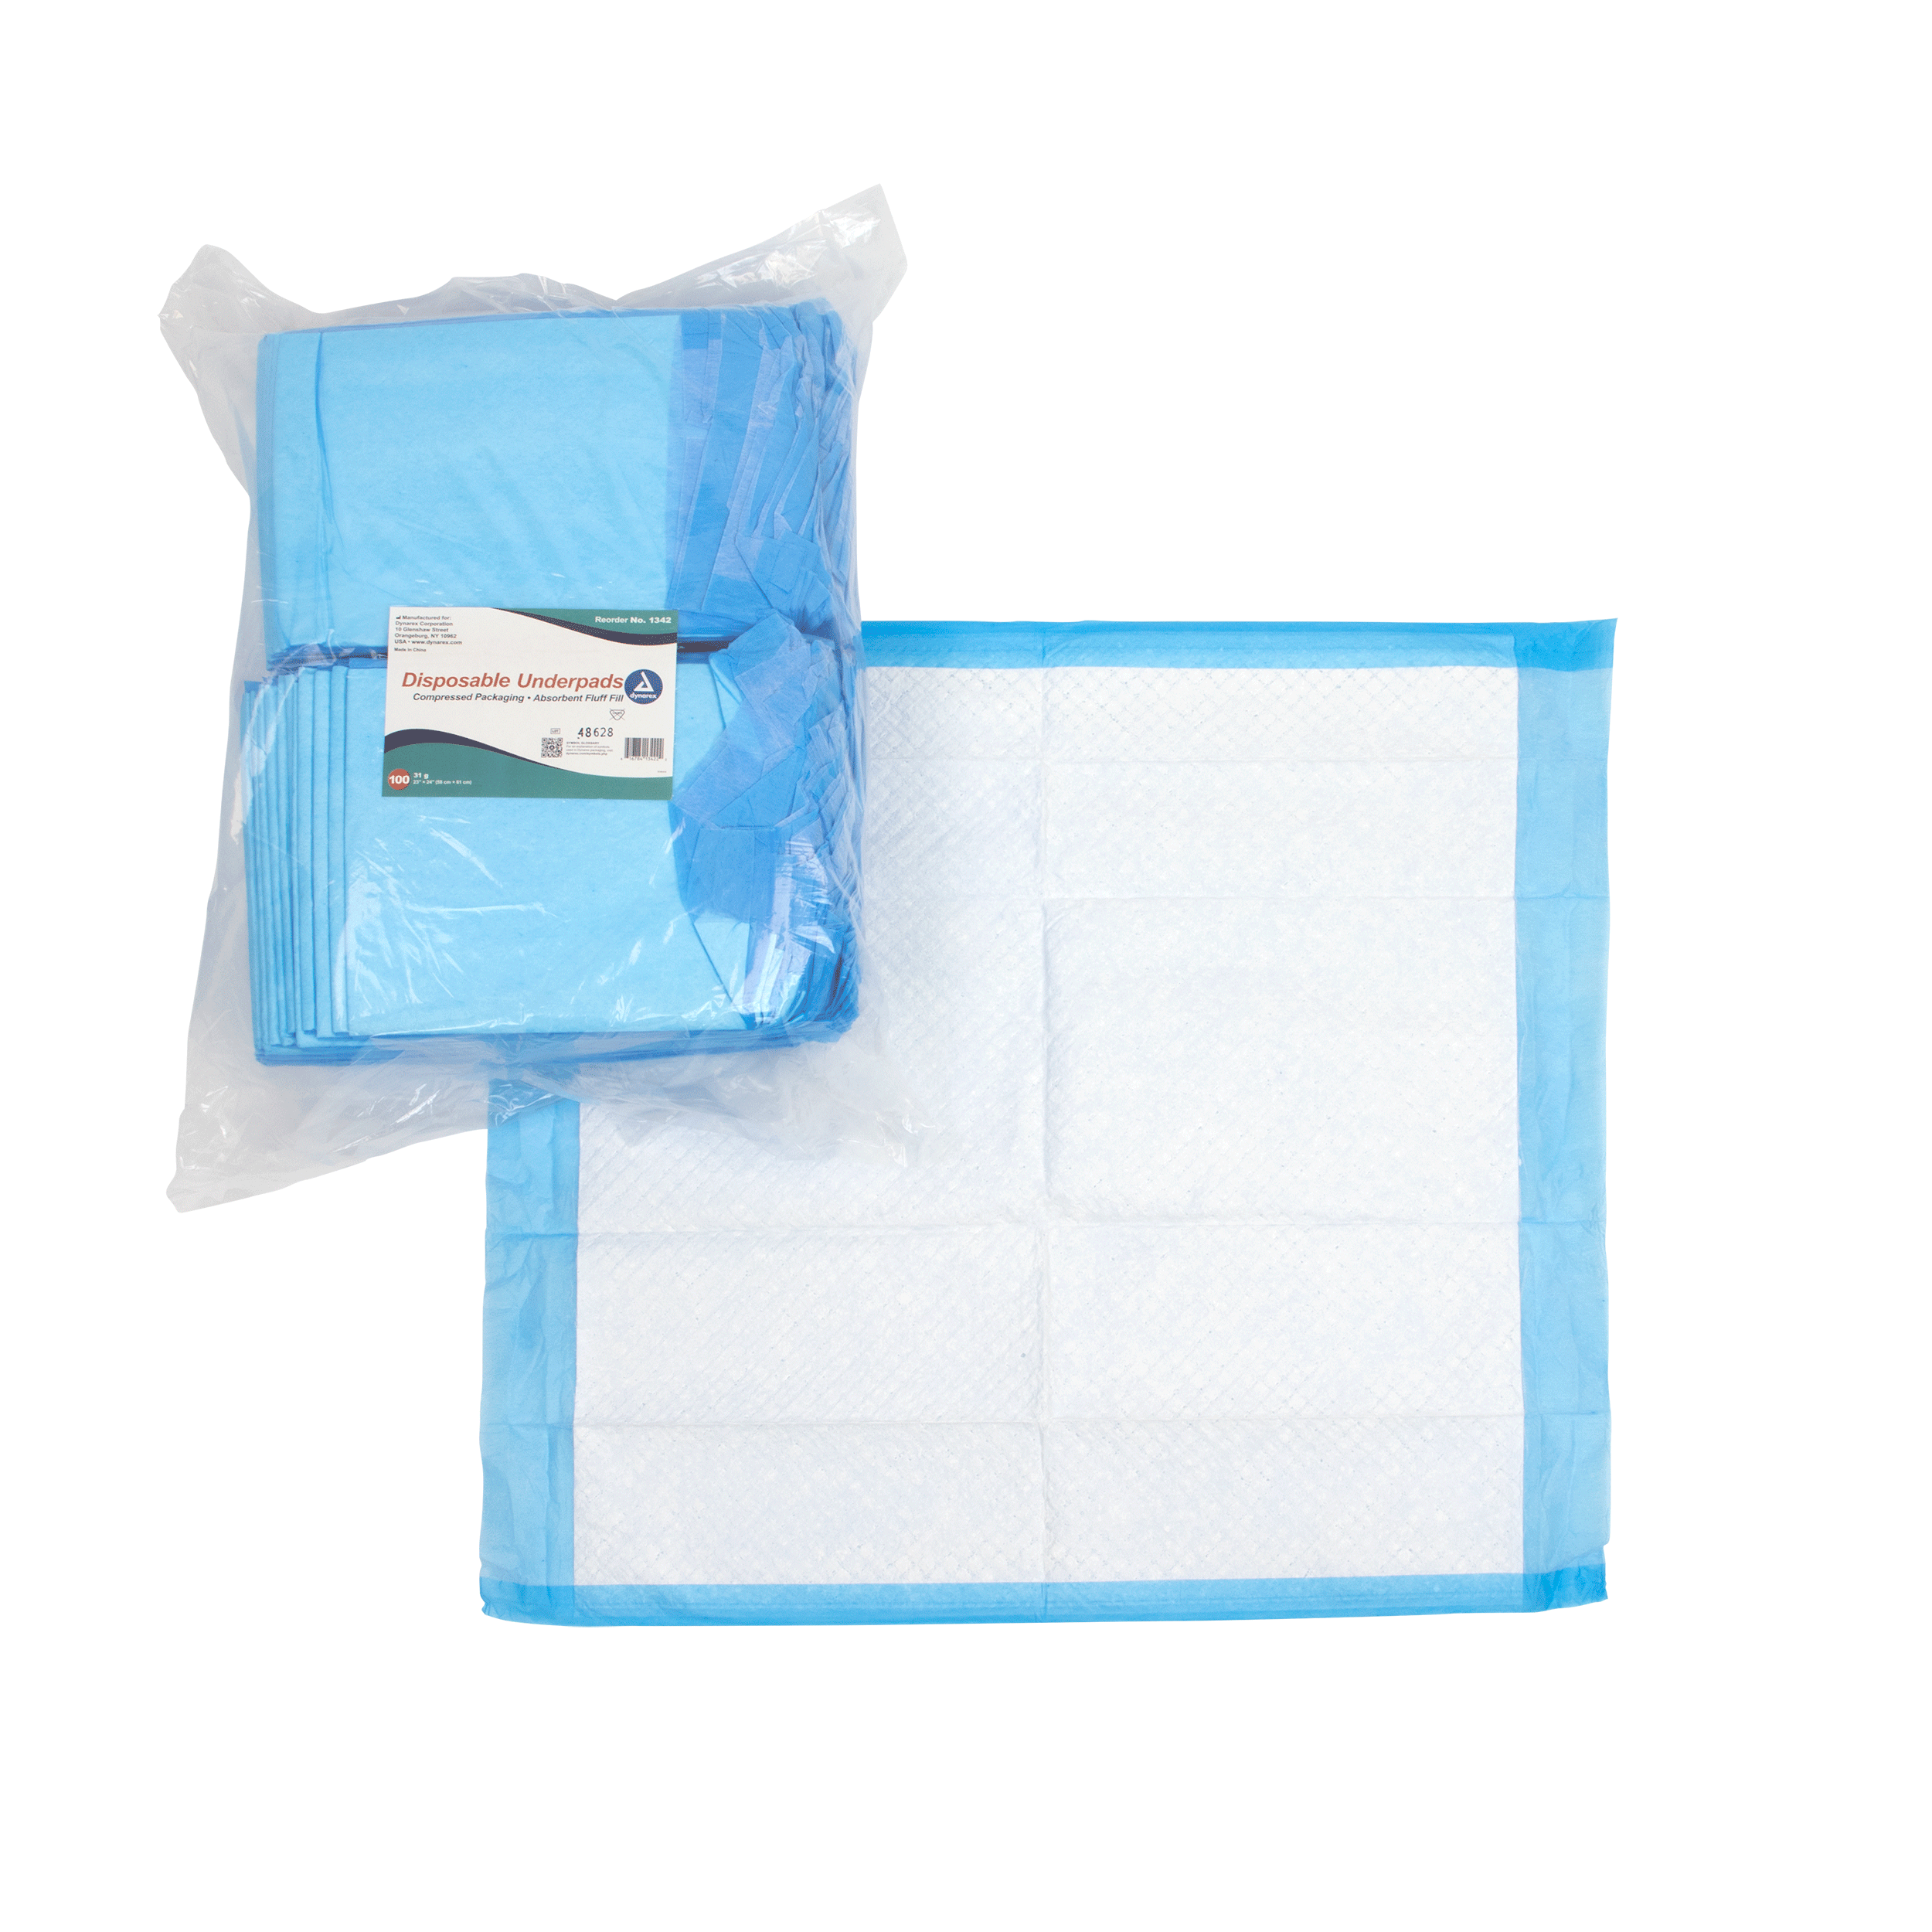 Disposable Underpads, 23 x 24 (31 g)